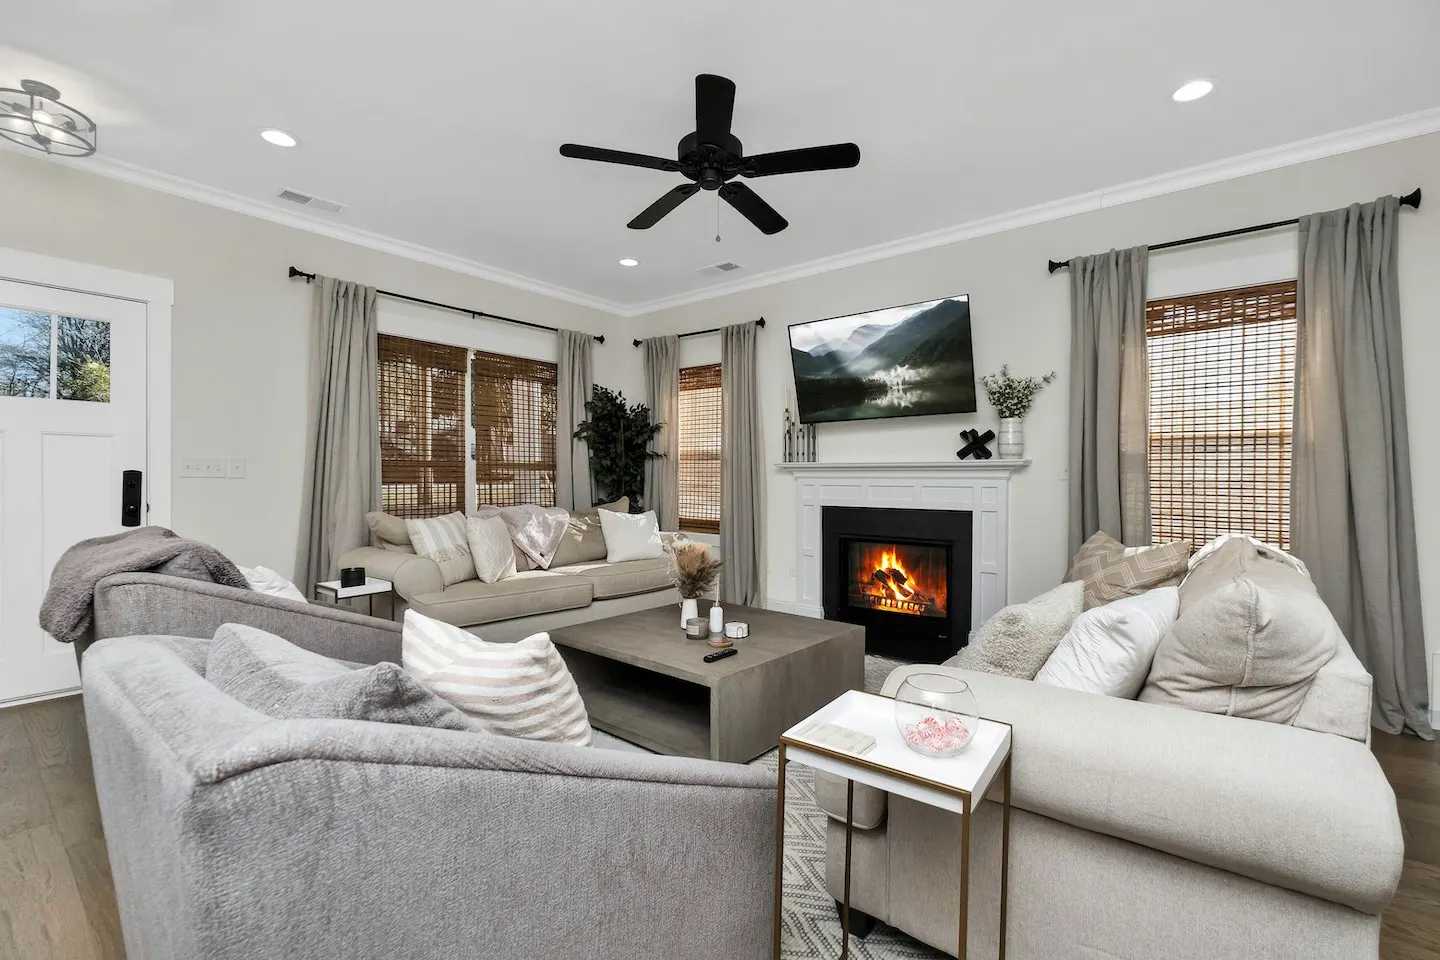 A living room in Lafayette, Louisiana with a black ceiling fan and a fireplace.
